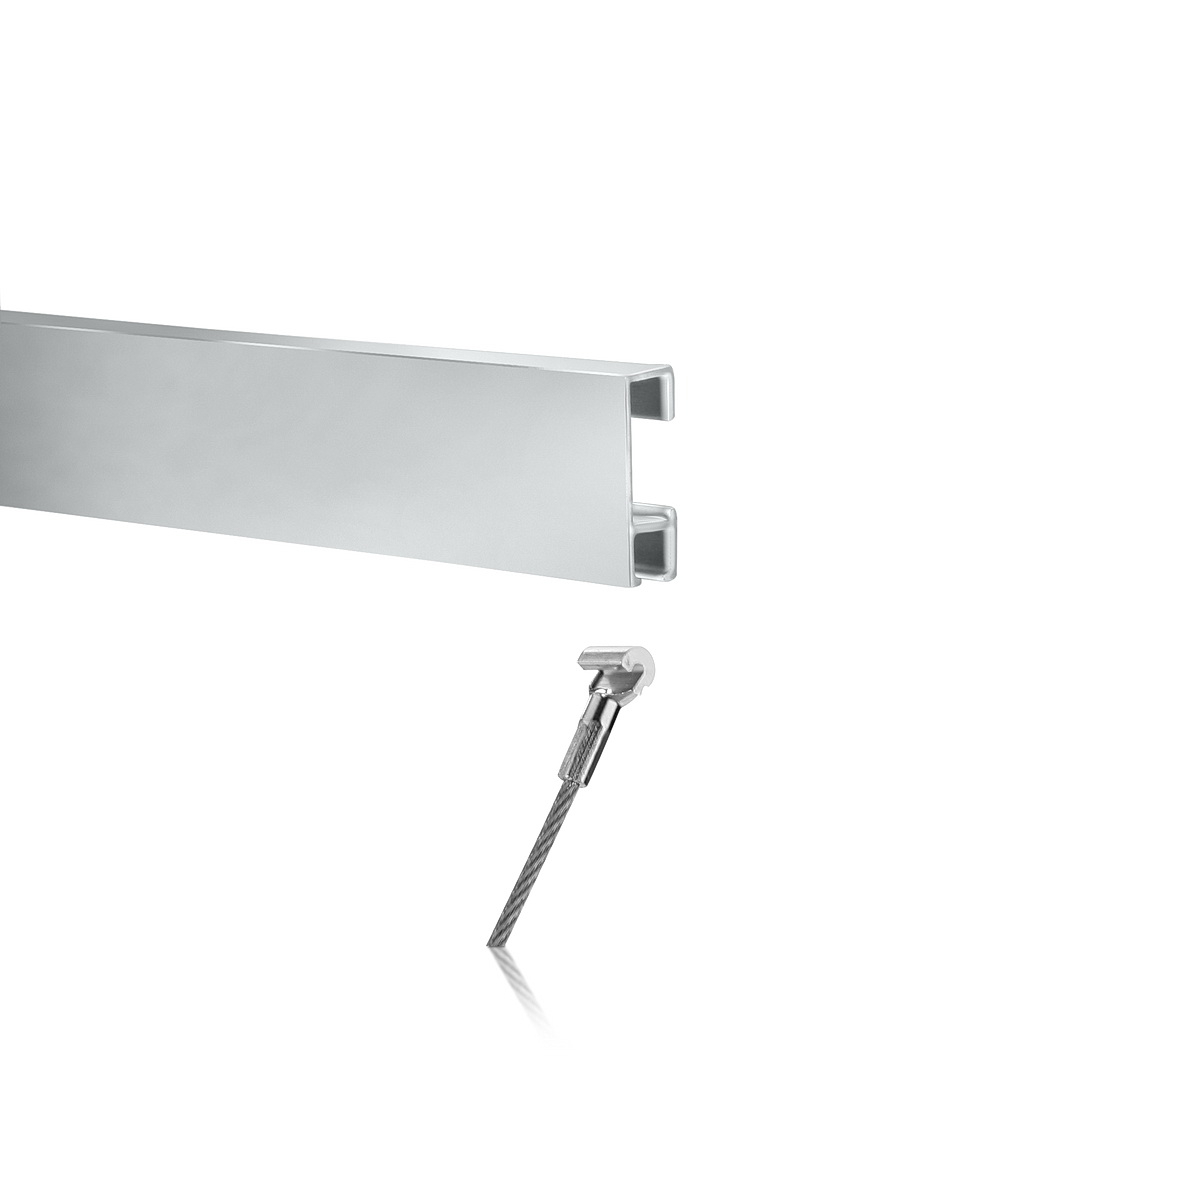 Easy Rail System, Clear Anodized Finish